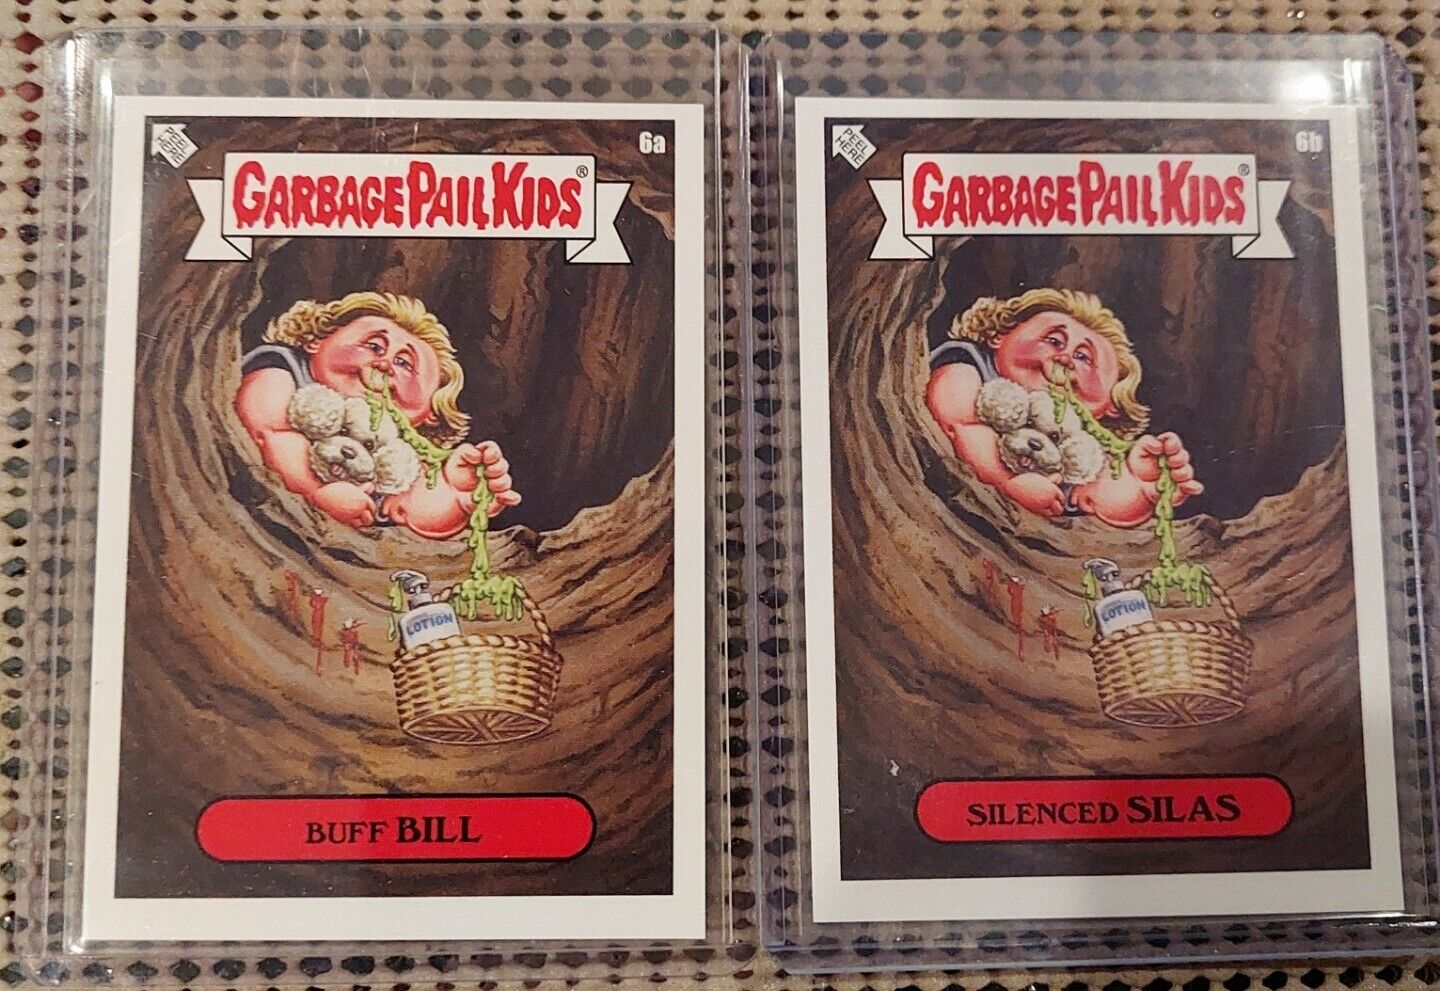 LOT OF 2 CARDS: Garbage Pail Kids GPK OTH (BUFFY BILL & SILENCED SILAS) NYCC 